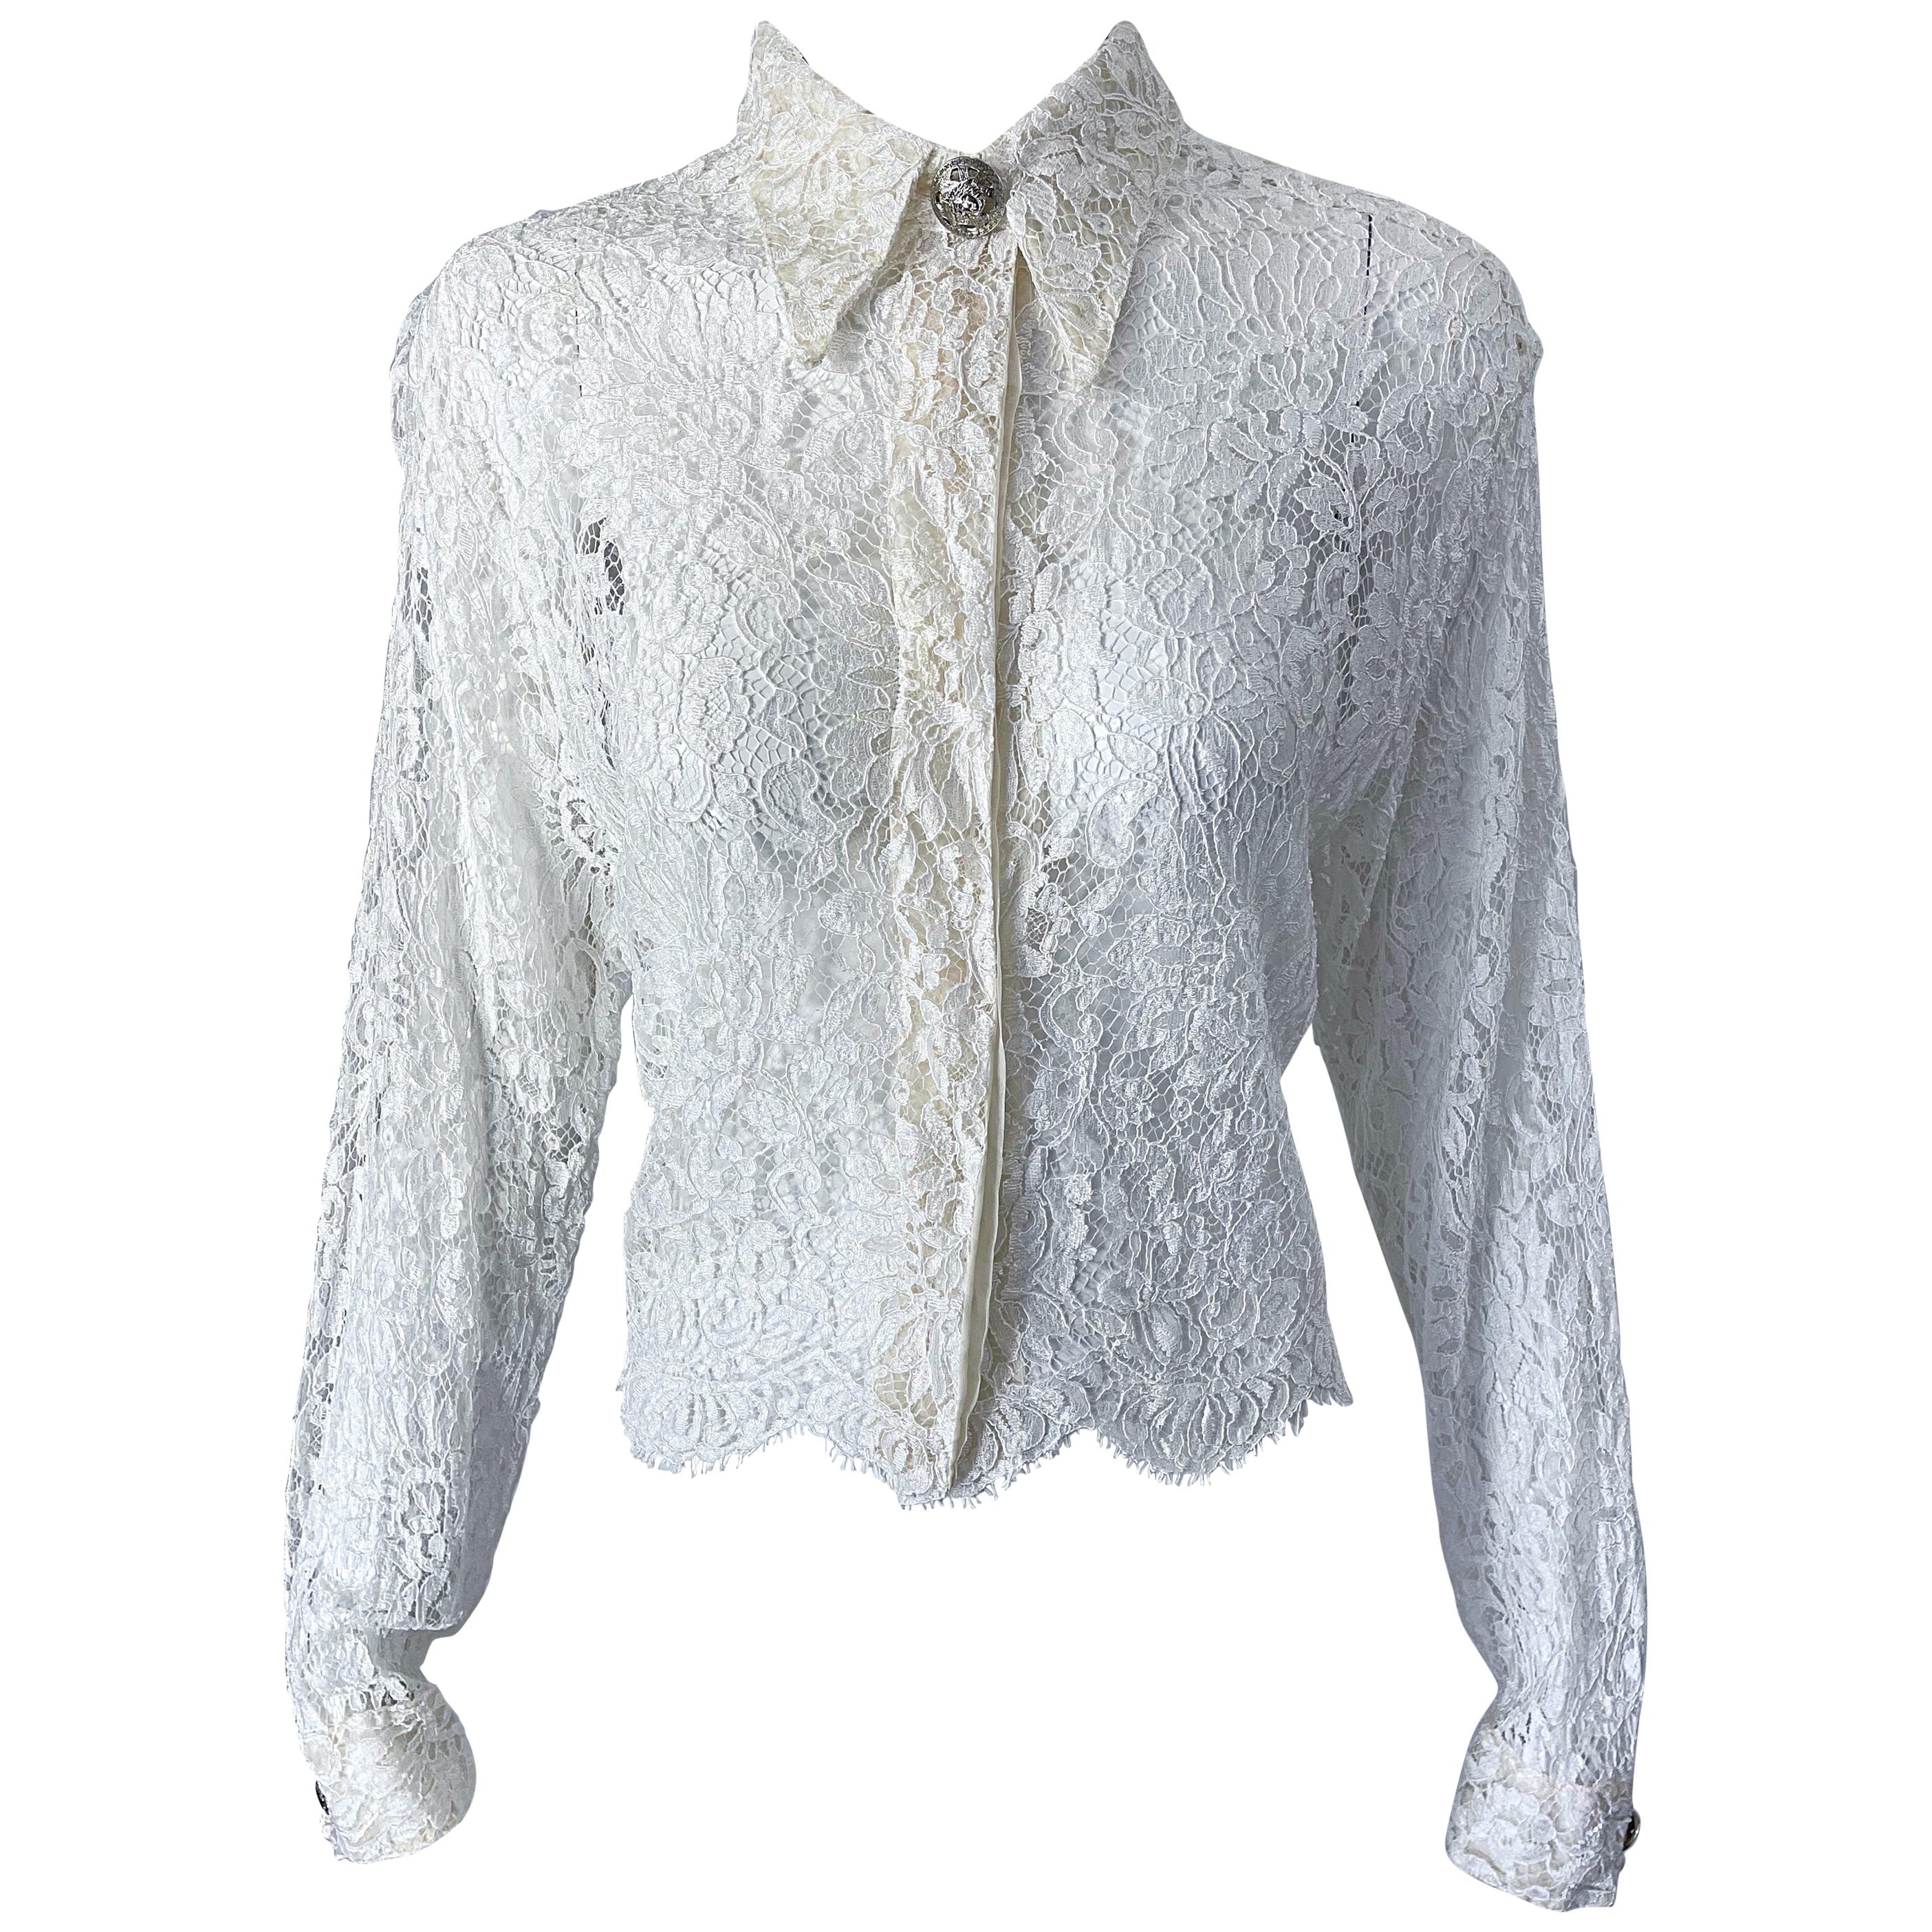 1990s Gianni Versace Couture White Lace Medusa Buttons Size 44 8 / 10 Blouse Top